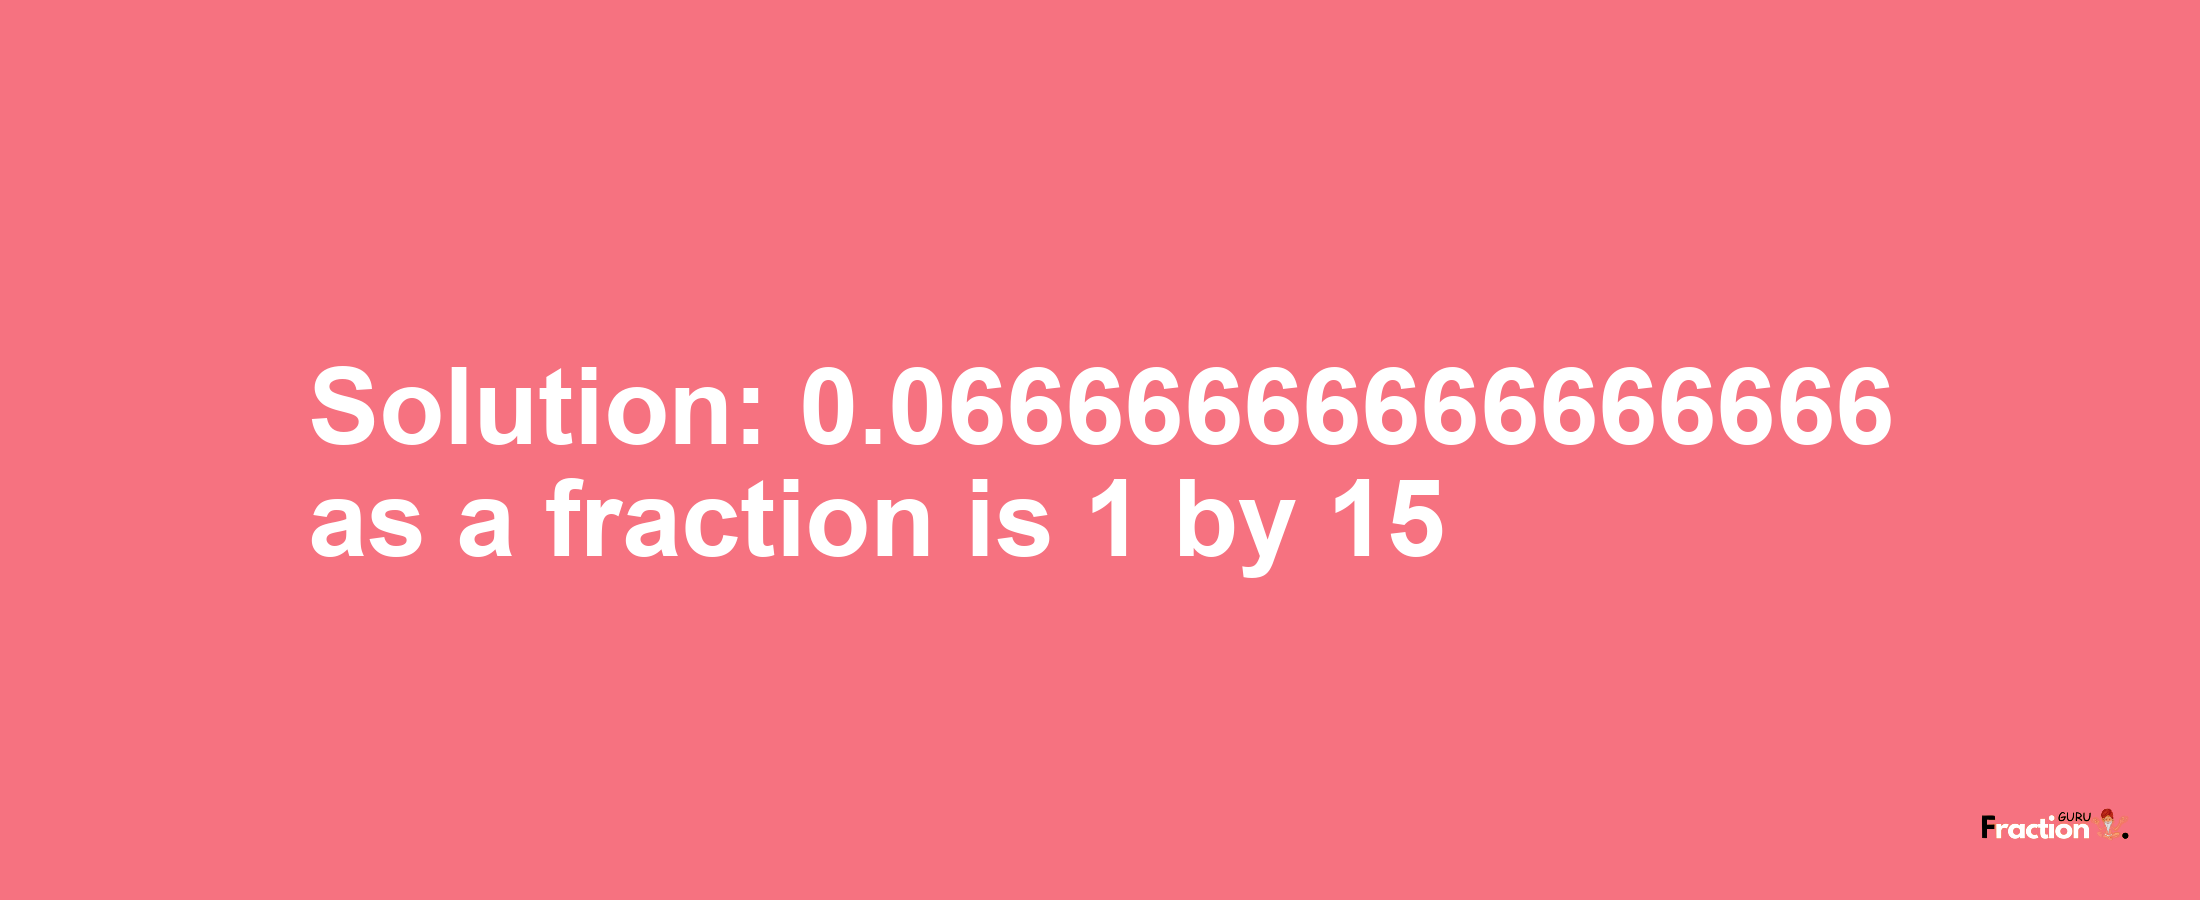 Solution:0.06666666666666666 as a fraction is 1/15